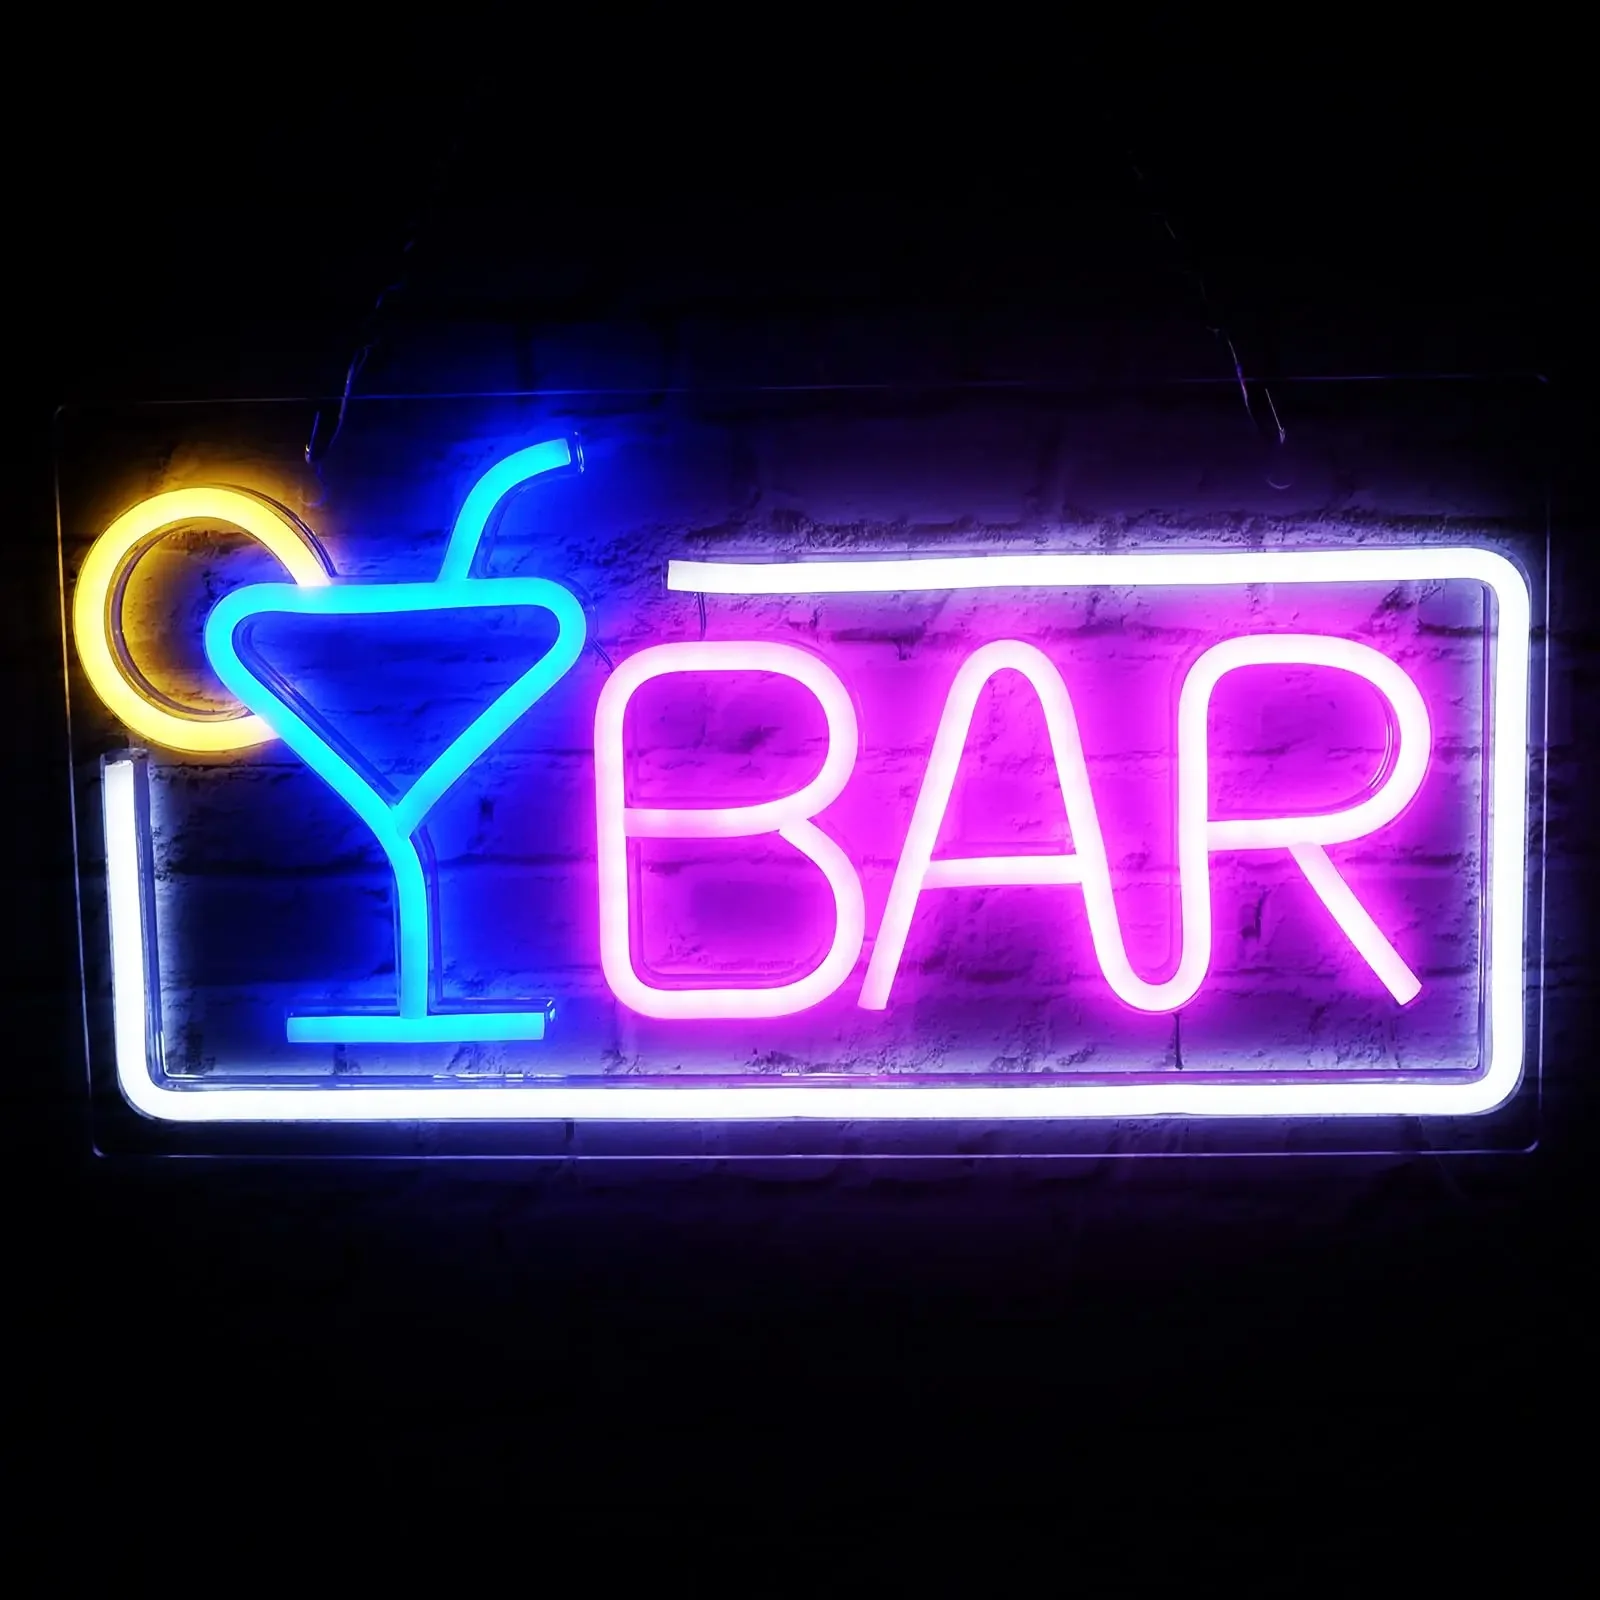 

LED Neon Signs for Home Bar, Wall Decor Led Beer Cocktail USB with Dimmer & Switch, Light Up Neon Wall Signs Pub Party Gifts